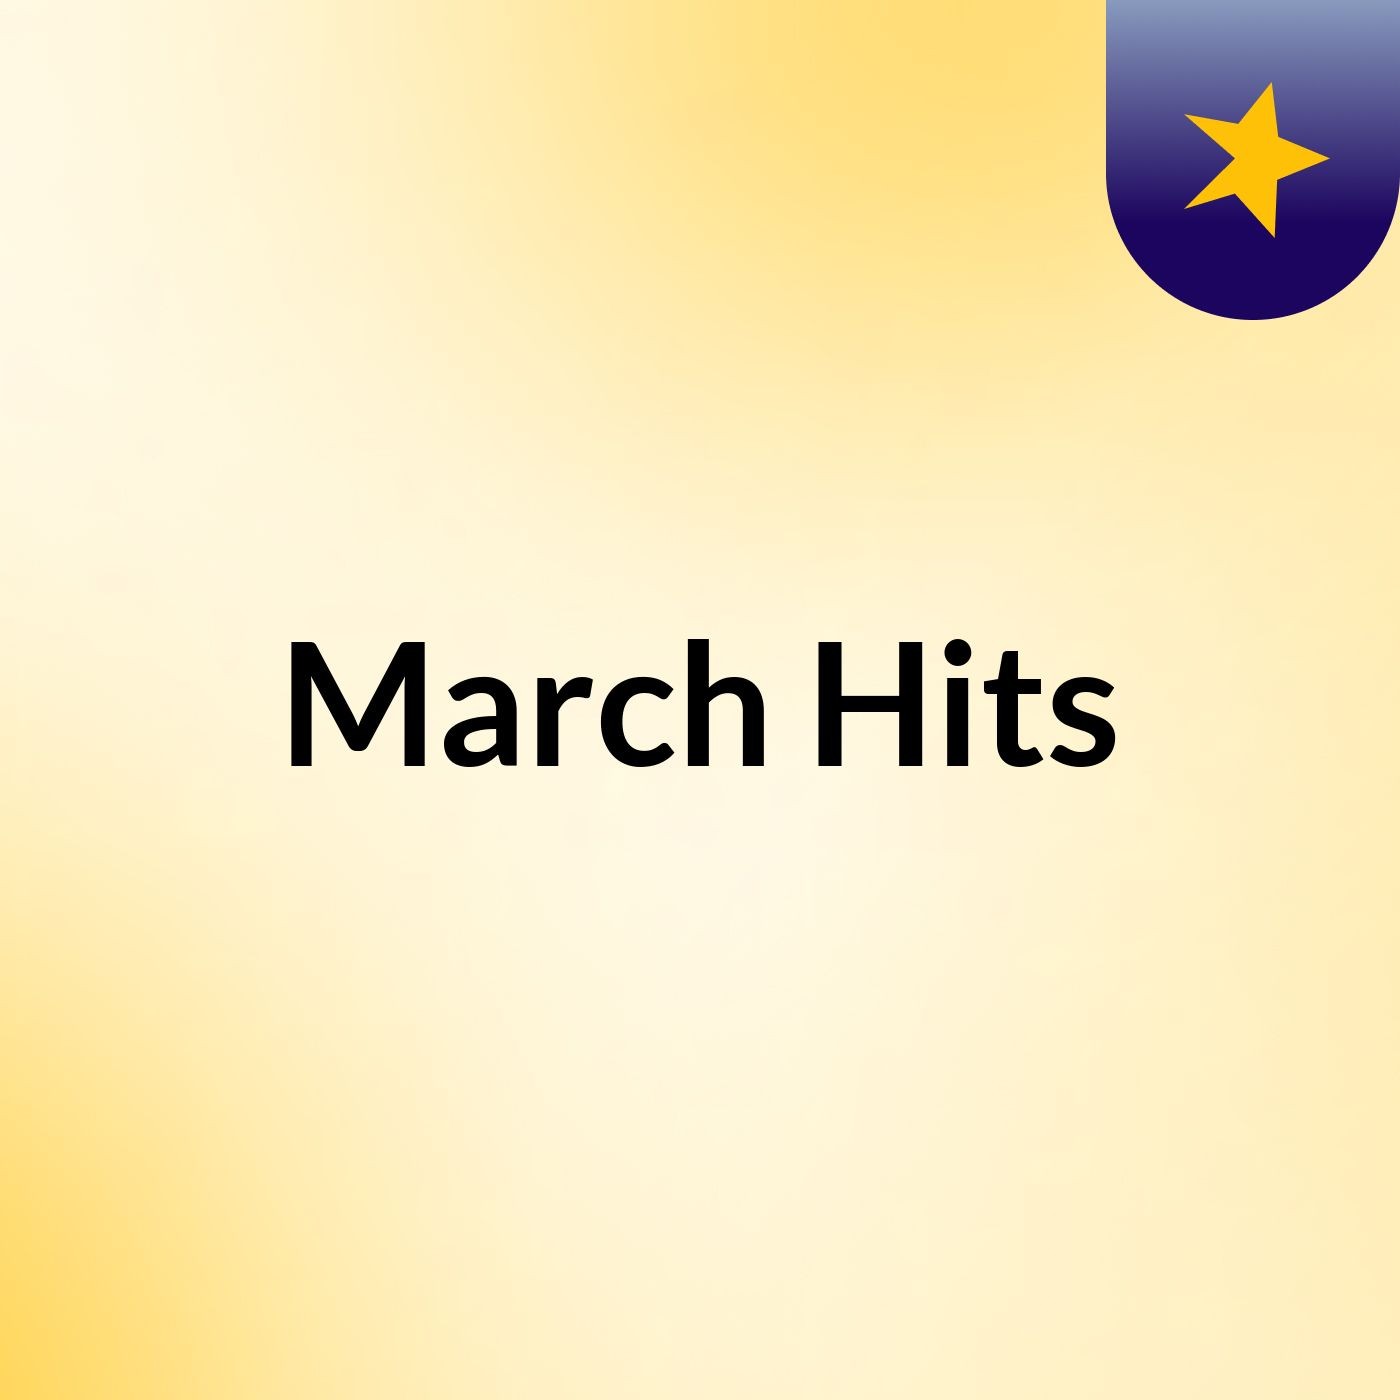 March Hits